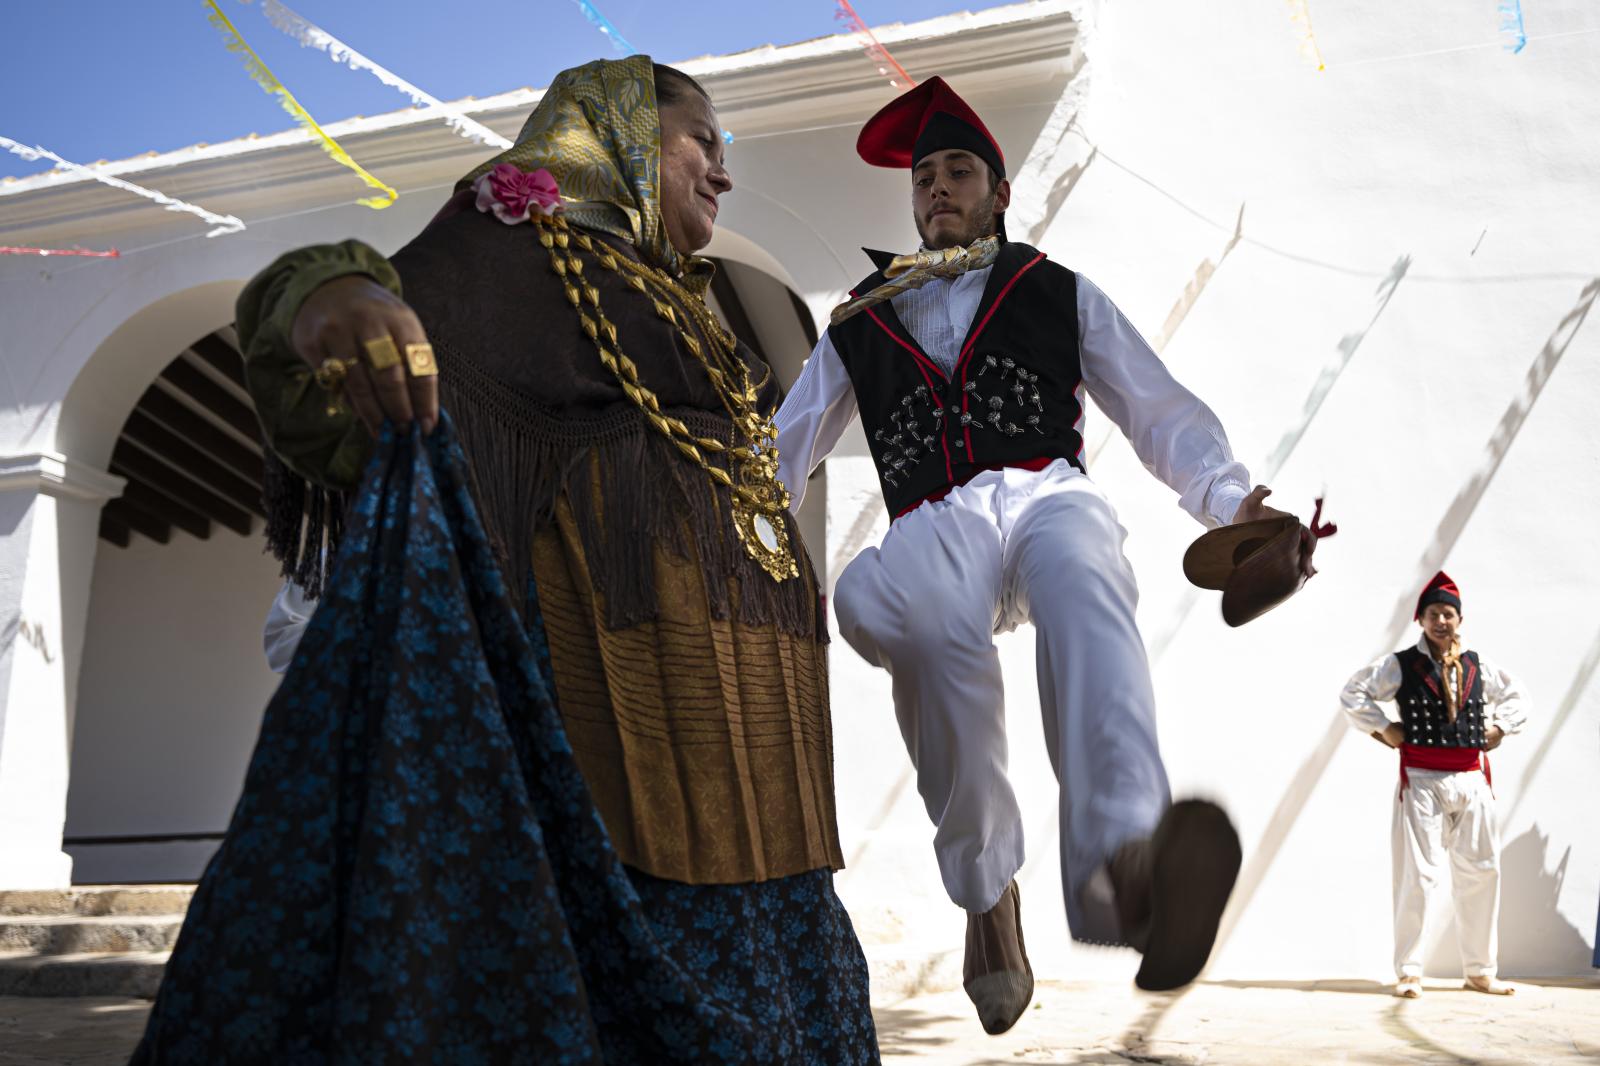 Image from Daily News - El ball pagès is the traditional dance in Ibiza...